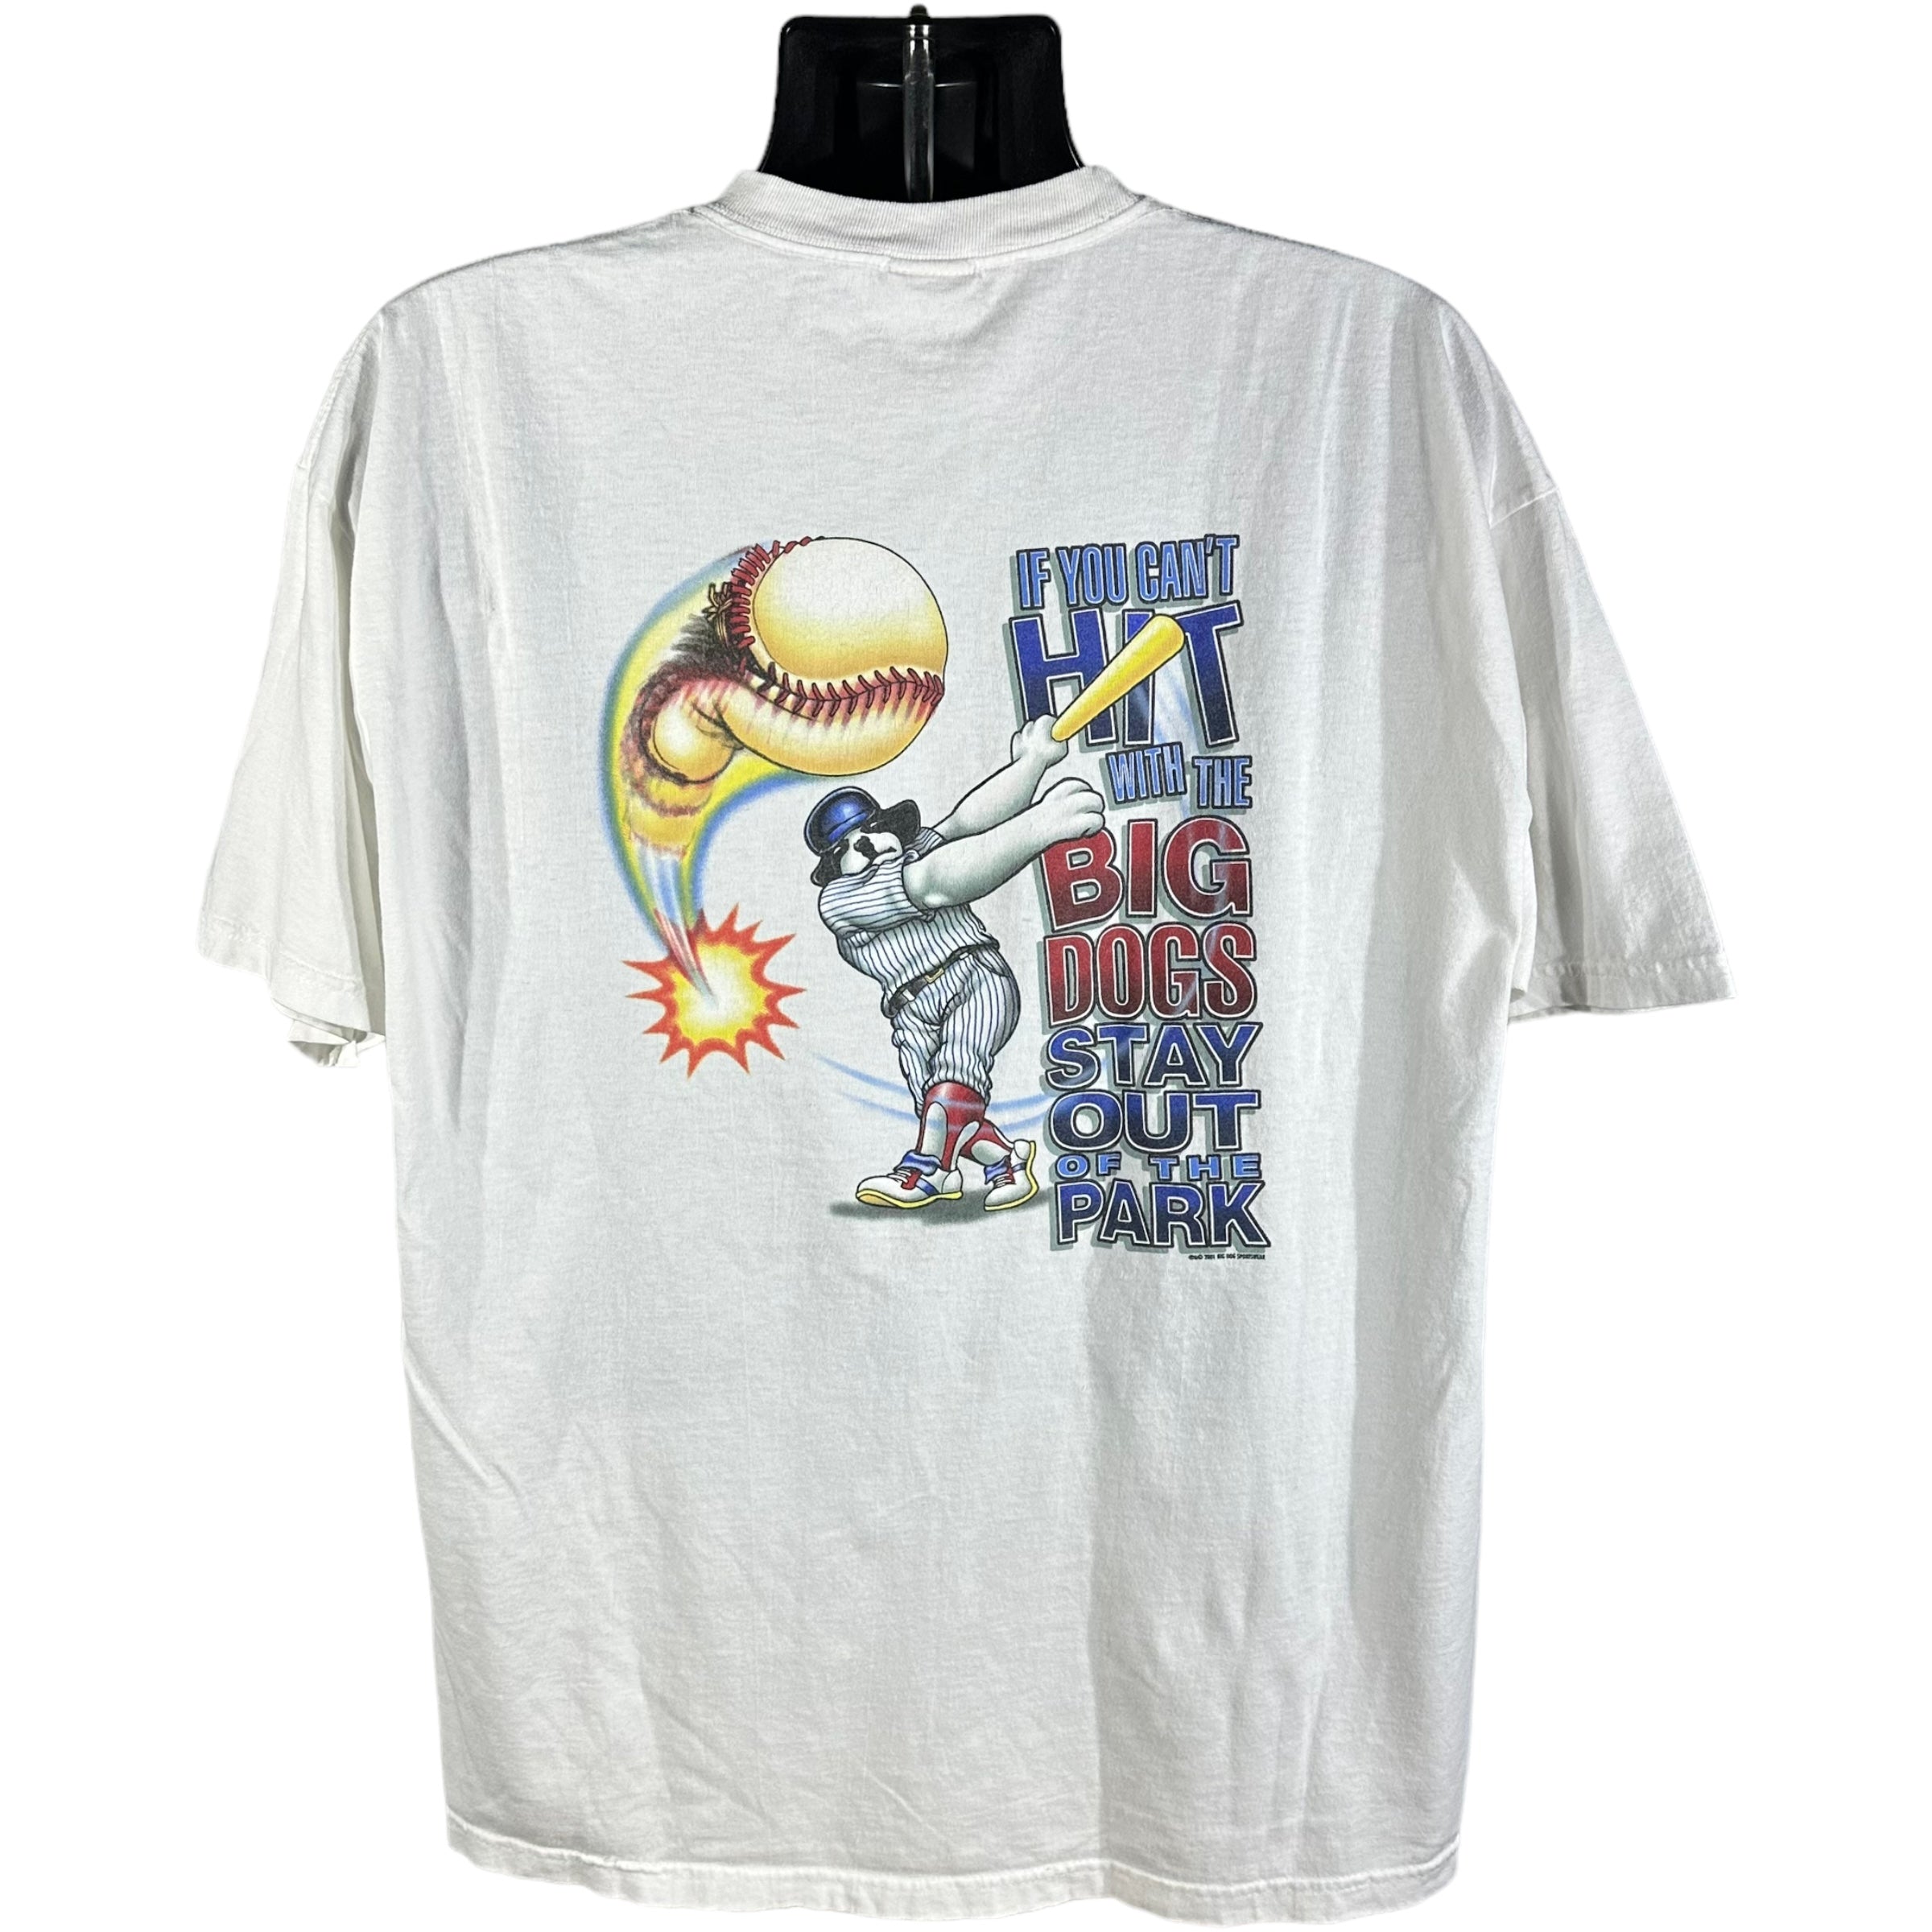 Vintage Big Dogs "If You Can't Hit With The Big Dogs" Mullet Tee